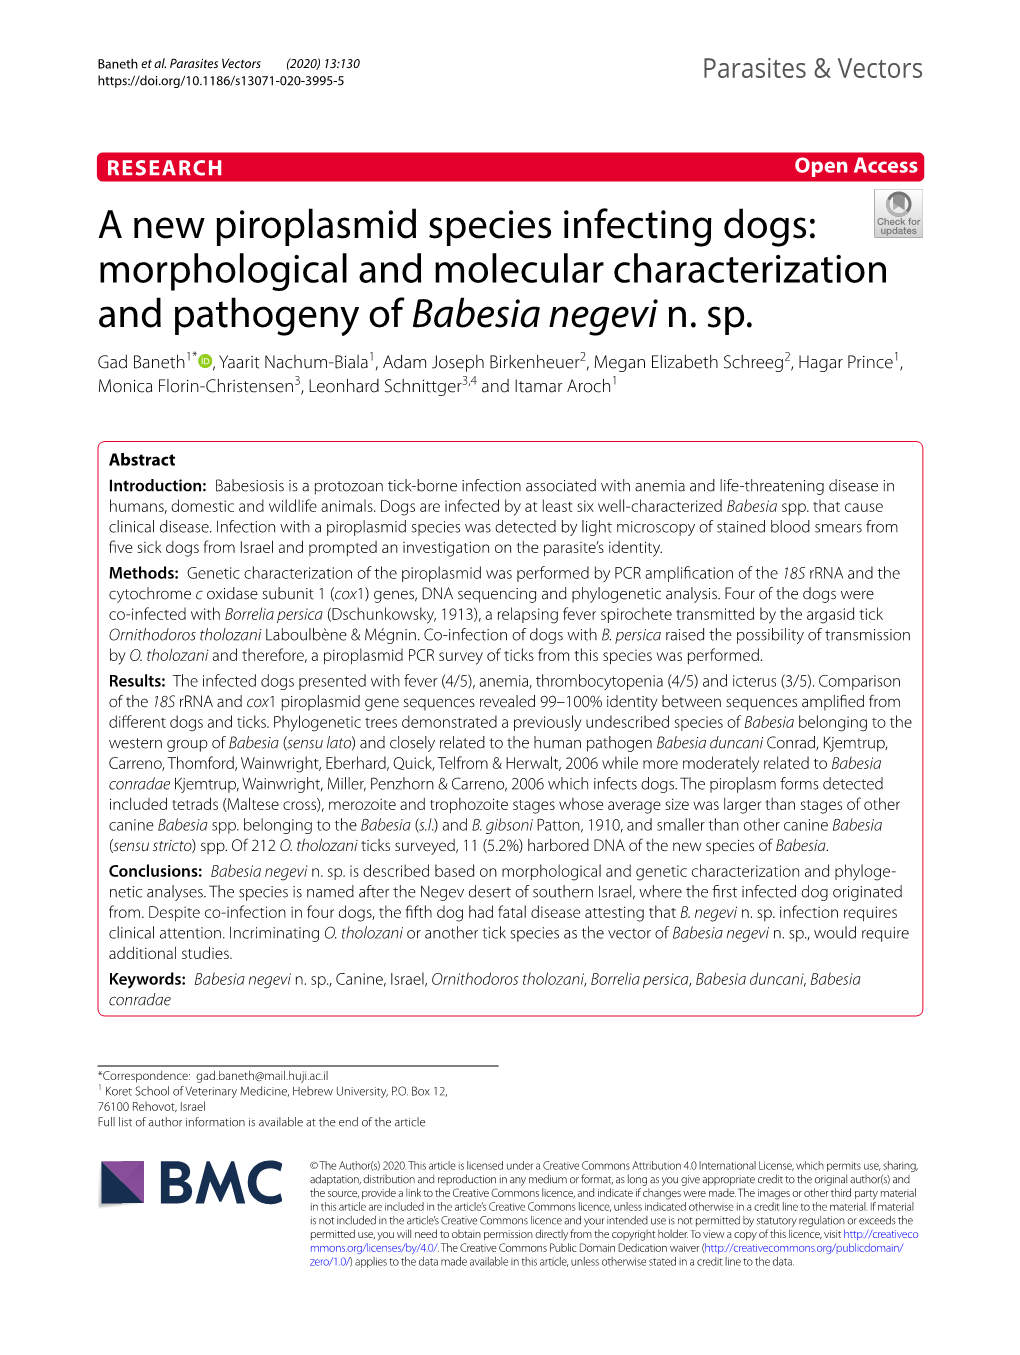 A New Piroplasmid Species Infecting Dogs: Morphological and Molecular Characterization and Pathogeny of Babesia Negevi N